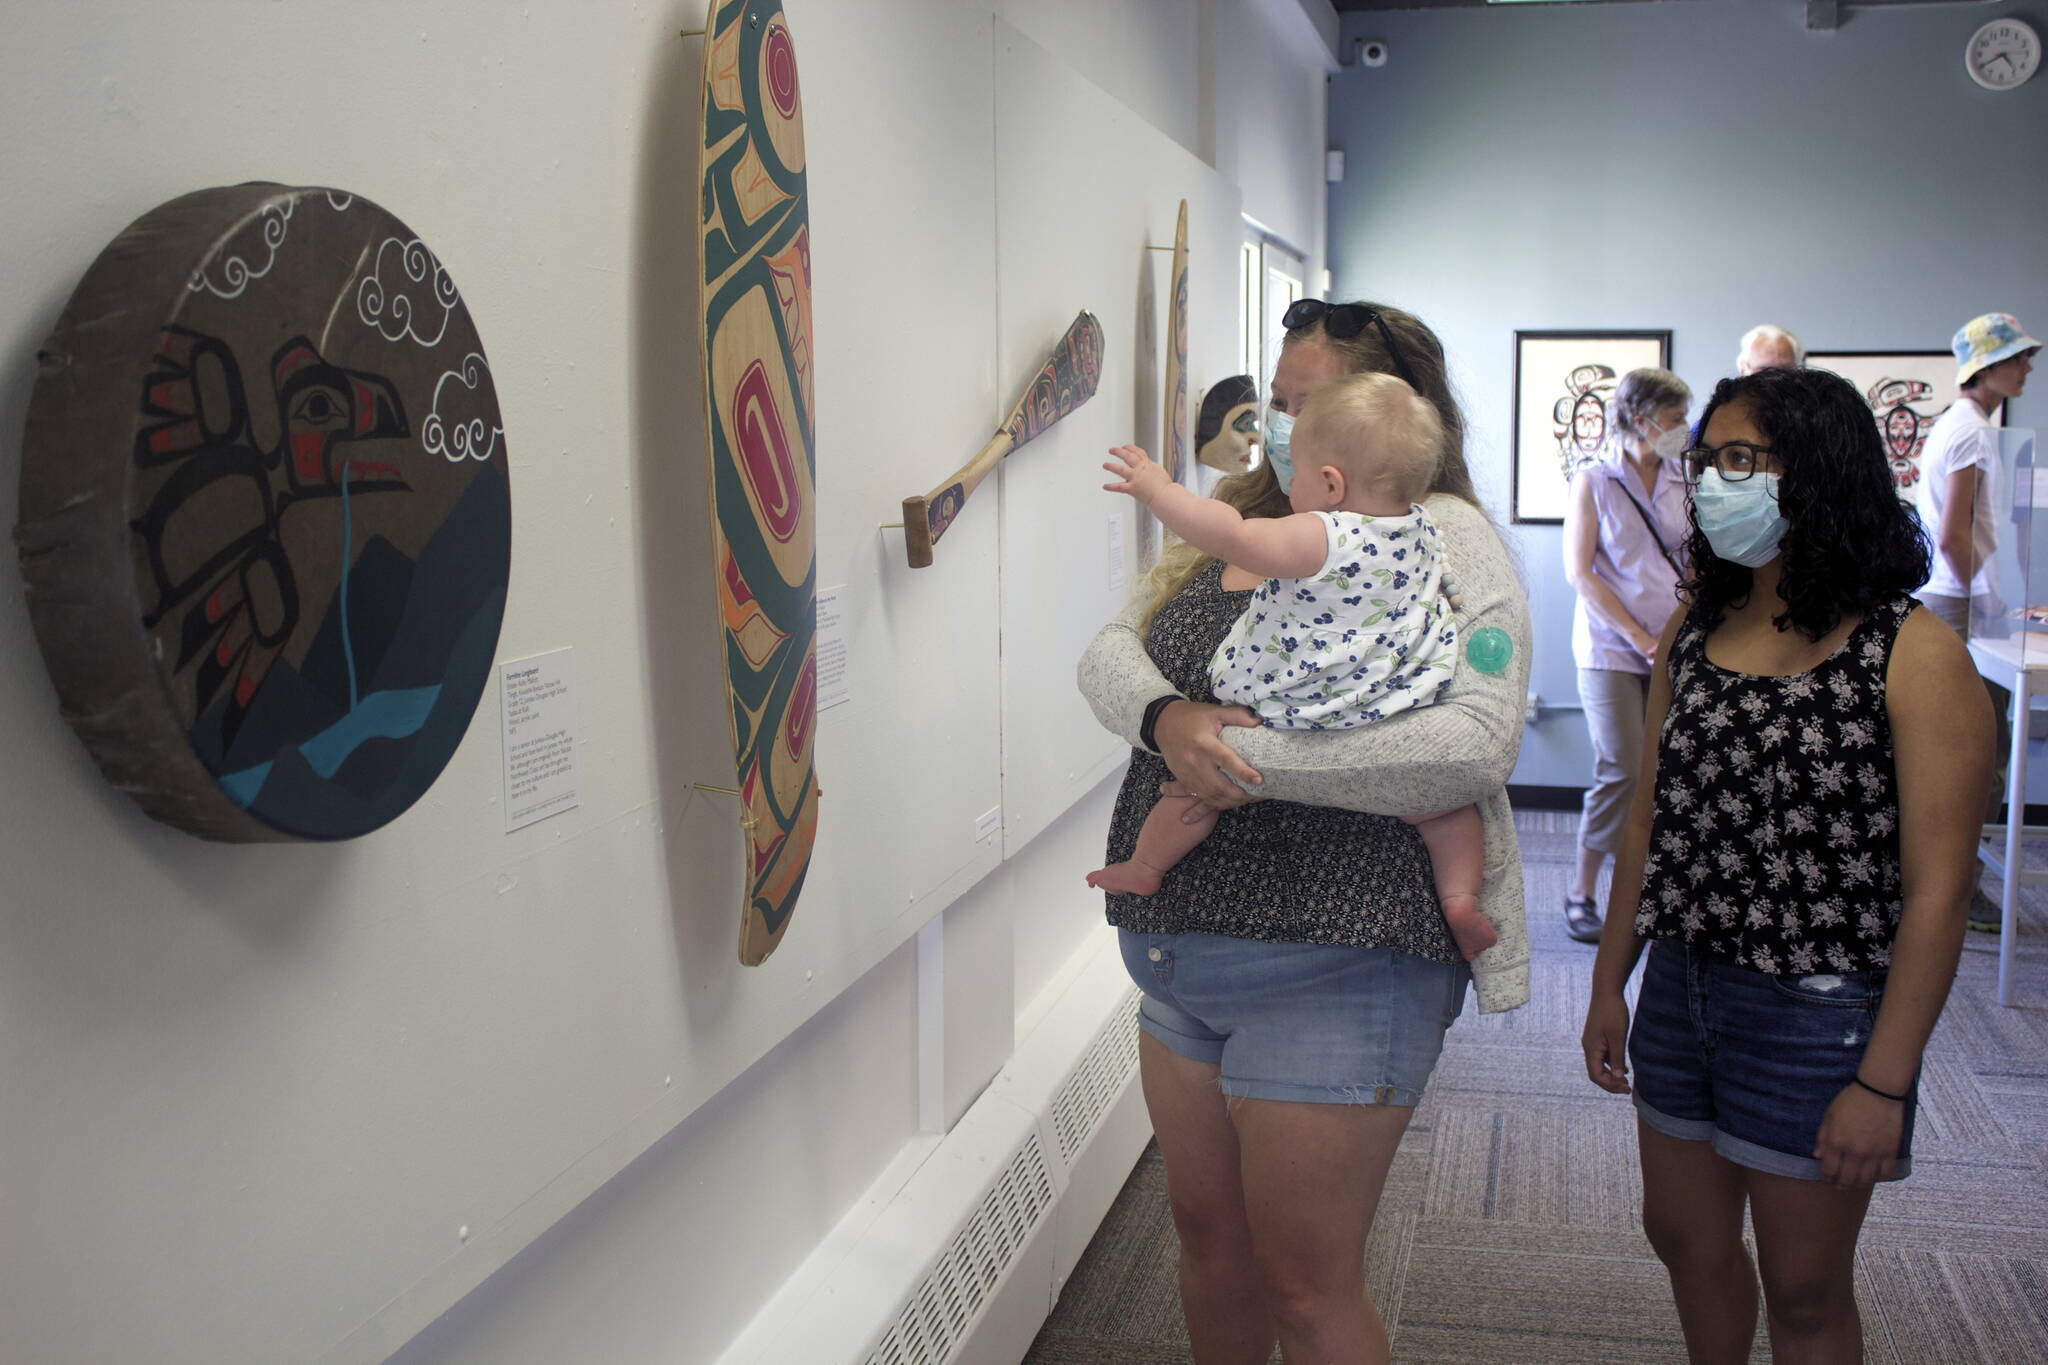 Kristall Bullock, 16, right, a Ketchikan resident whose Native-themed vest is part of the Sealaska Heritage Juried Youth Art Exhibit, examines works by her peers during the debt of the exhibit Friday at the Juneau Arts and Humanities Council. She said she saw works at the exhibit during Celebration in 2018, when she was with one of the dance groups, and “I was thinking I want to have a piece.” Viewing other works at the exhibit with Bullock are her sister, Anna Lindgren, and 8-month-old niece, Evelyn. (Mark Sabbatini / Juneau Empire)